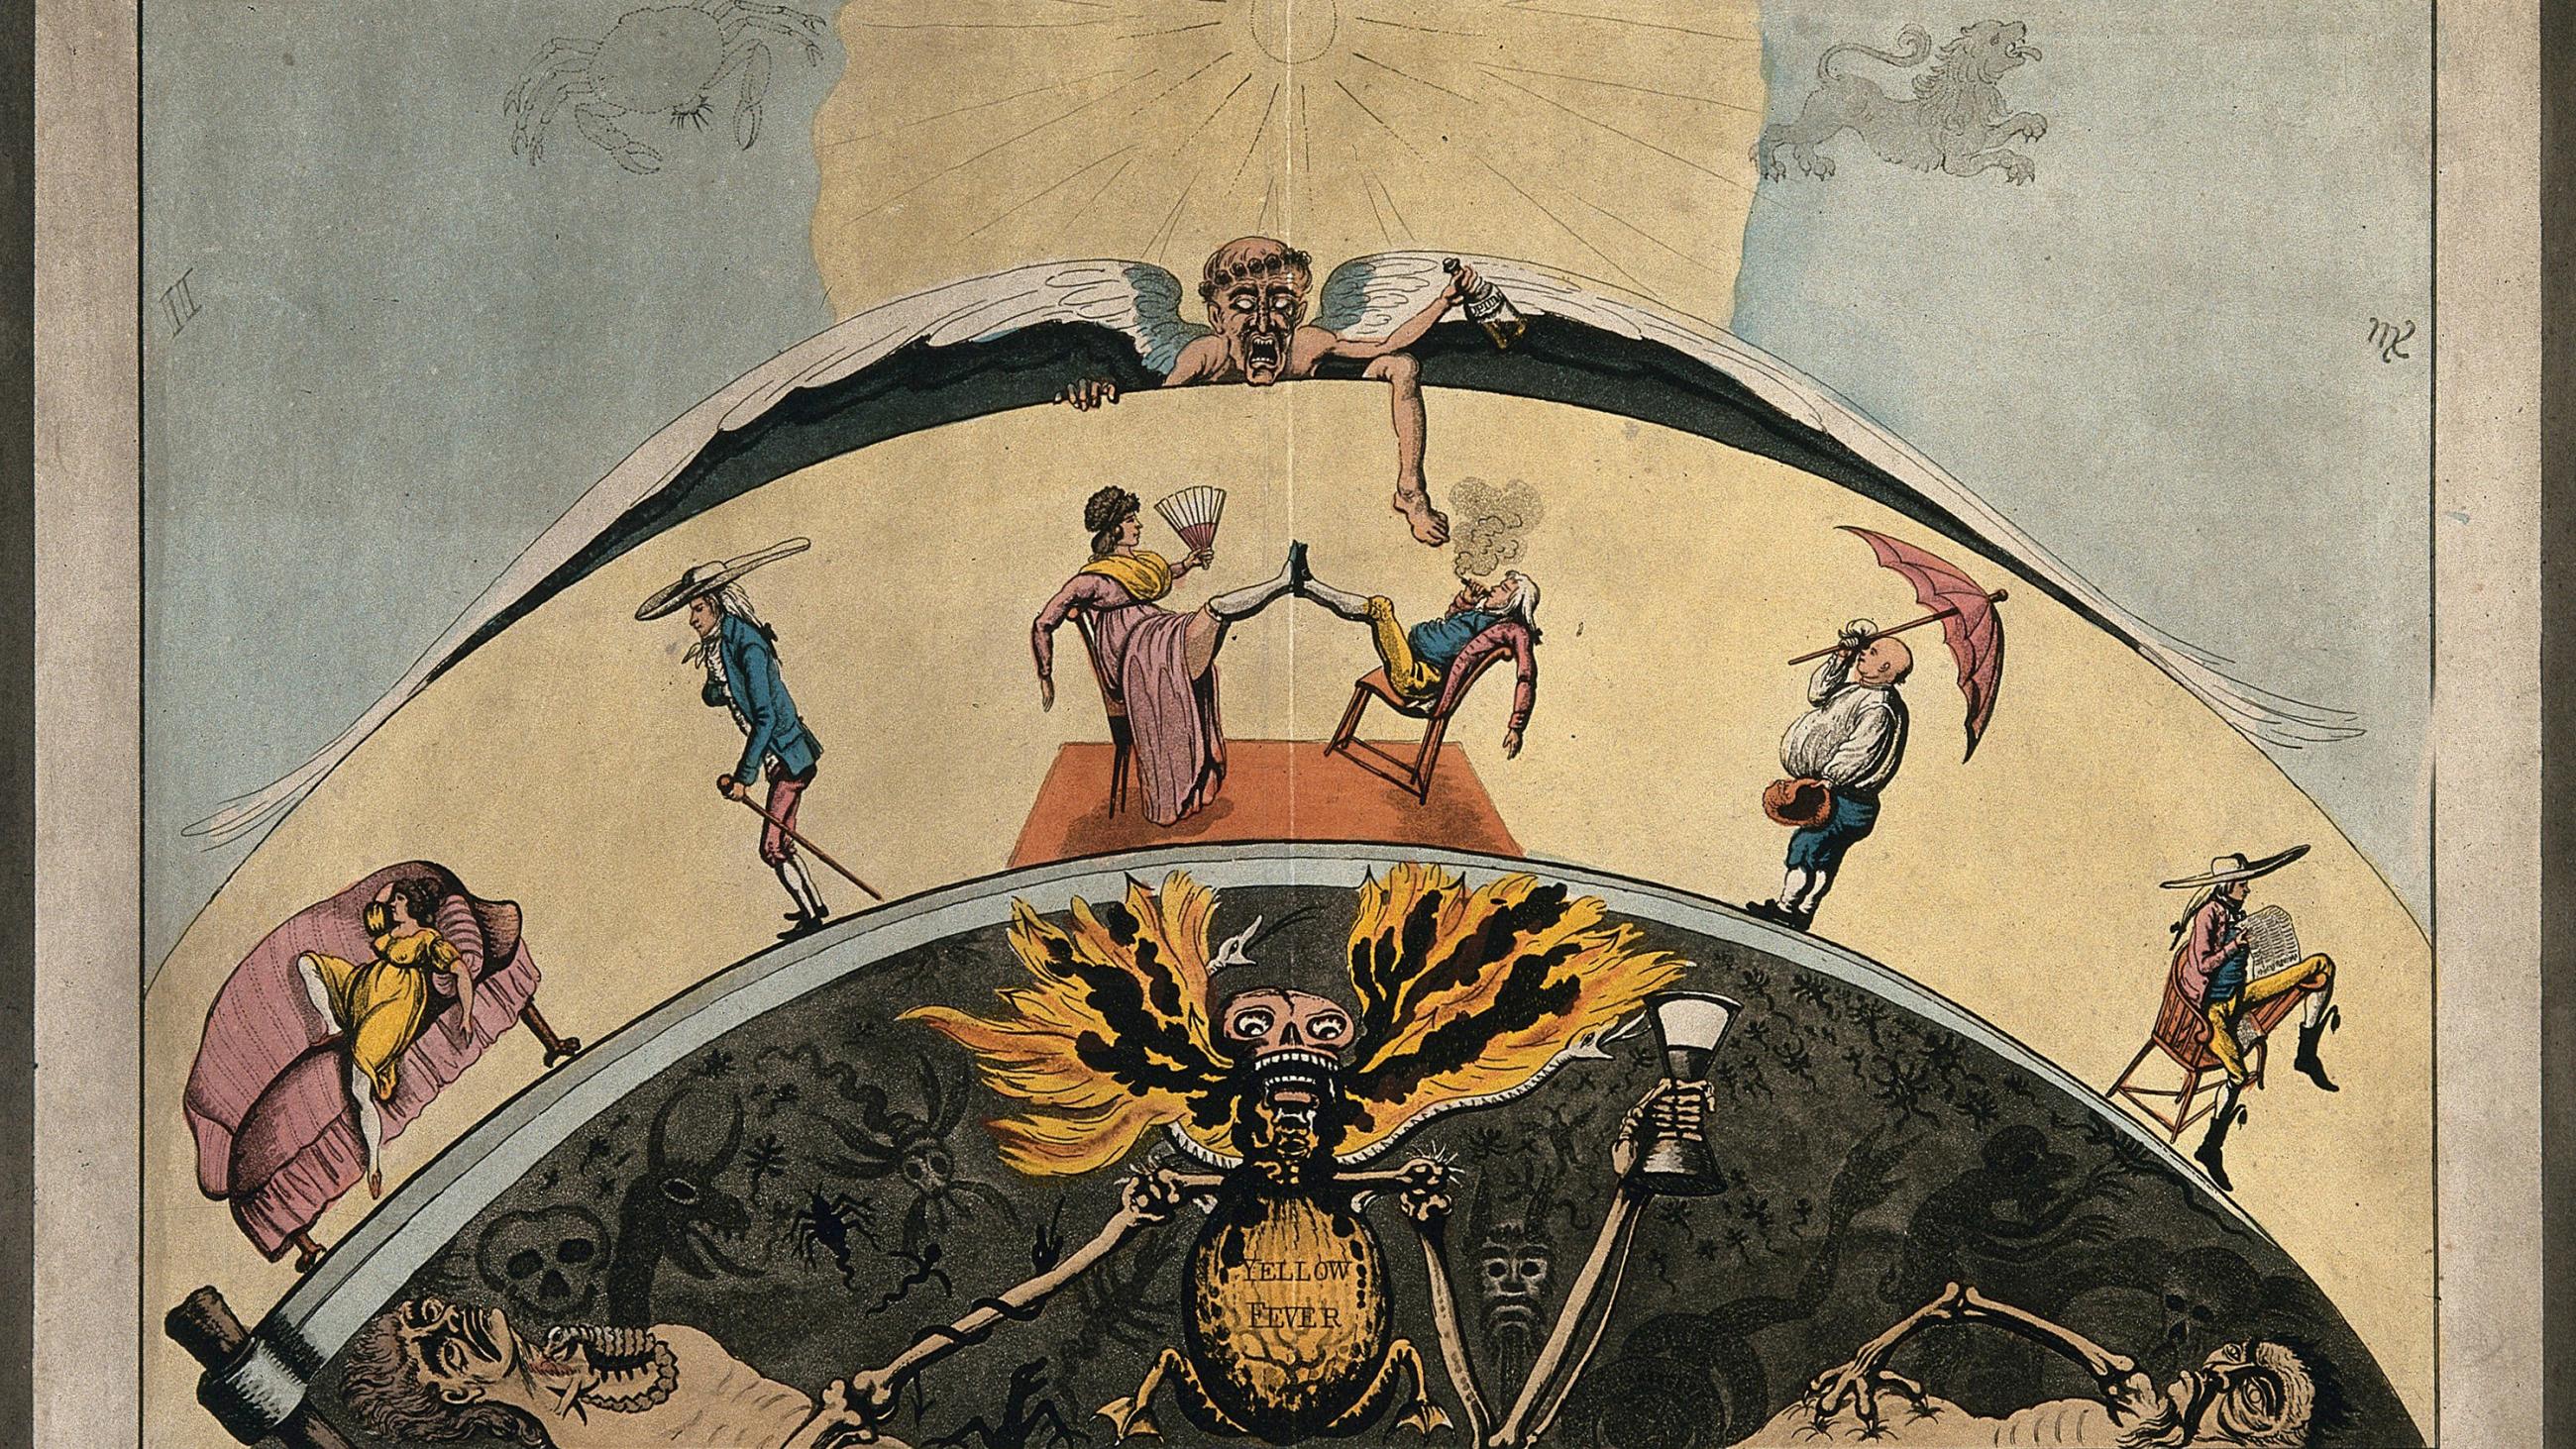  The image is an old color pencil drawing showing people lounging along a circular arc above and a devilish visage emblazoned with the words "Yellow Fever" below. 